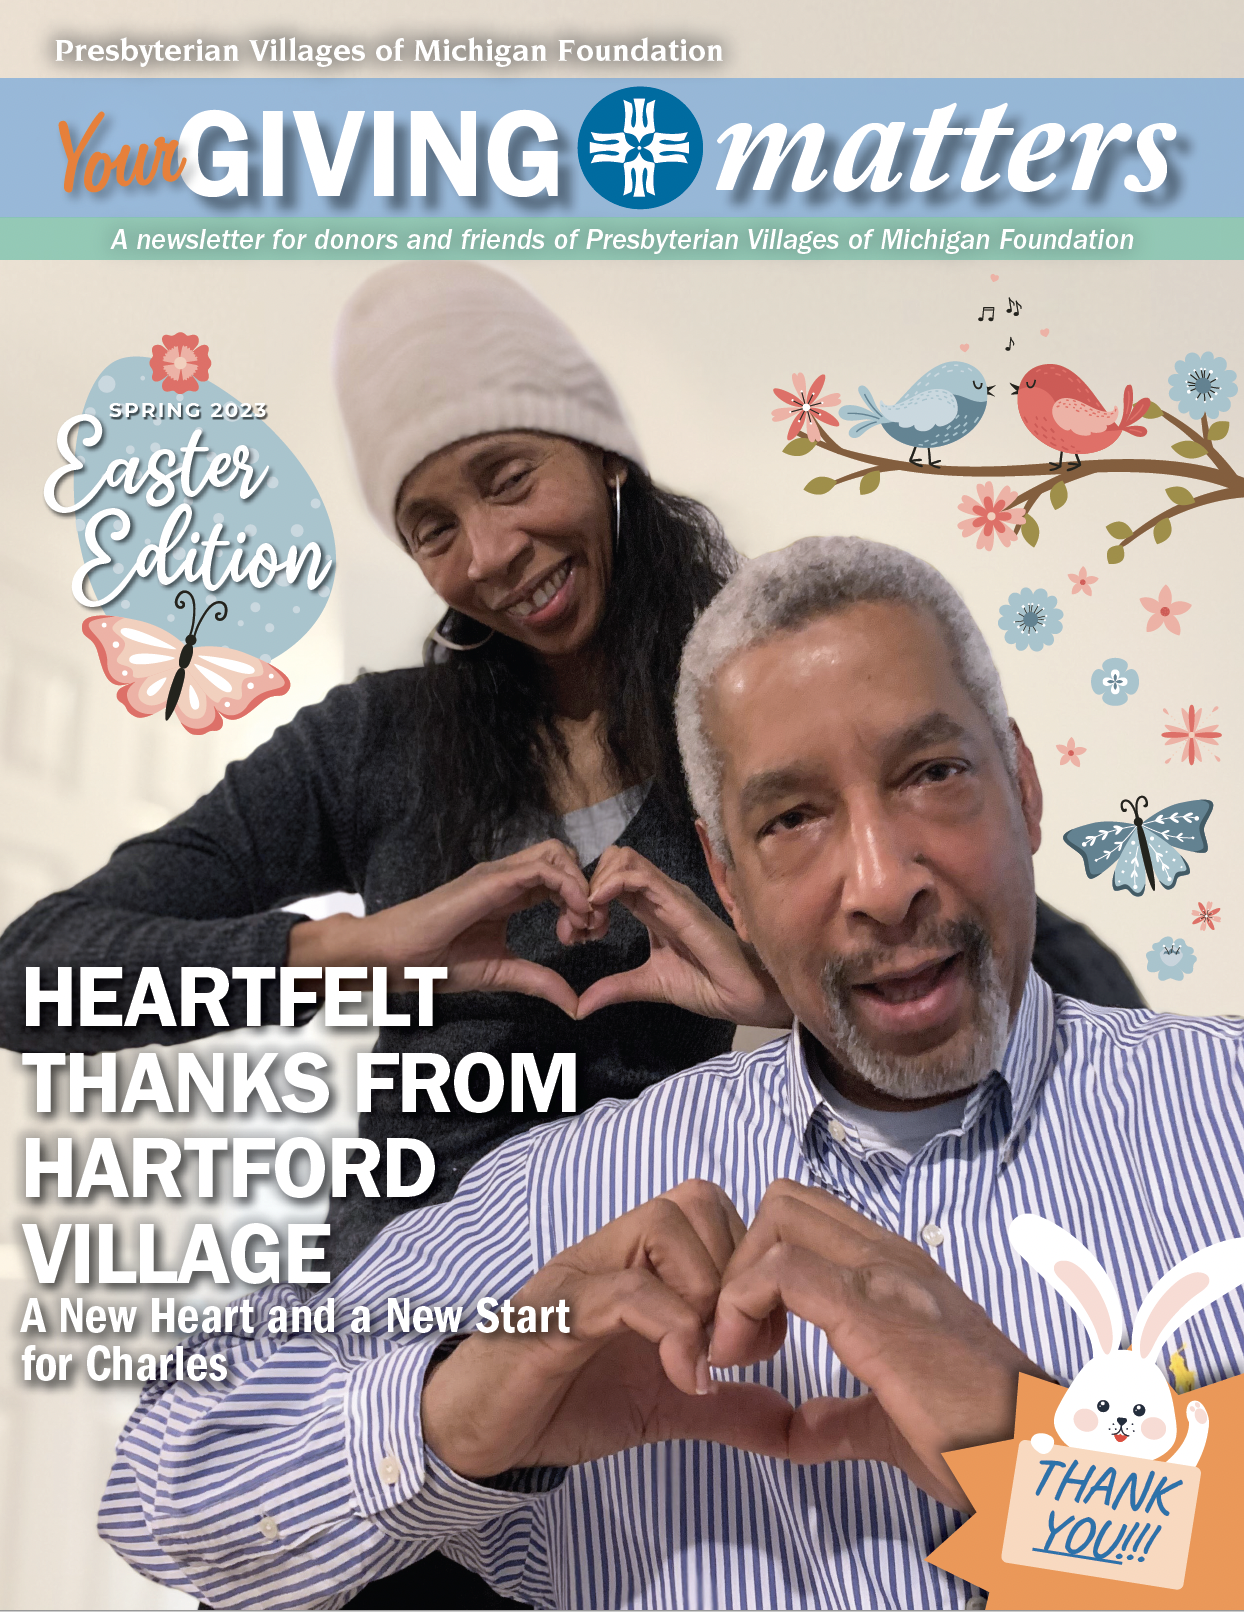 Read the Spring 2023 edition of Your Giving Matters and see how Charles at Hartford Village got a new start on life!